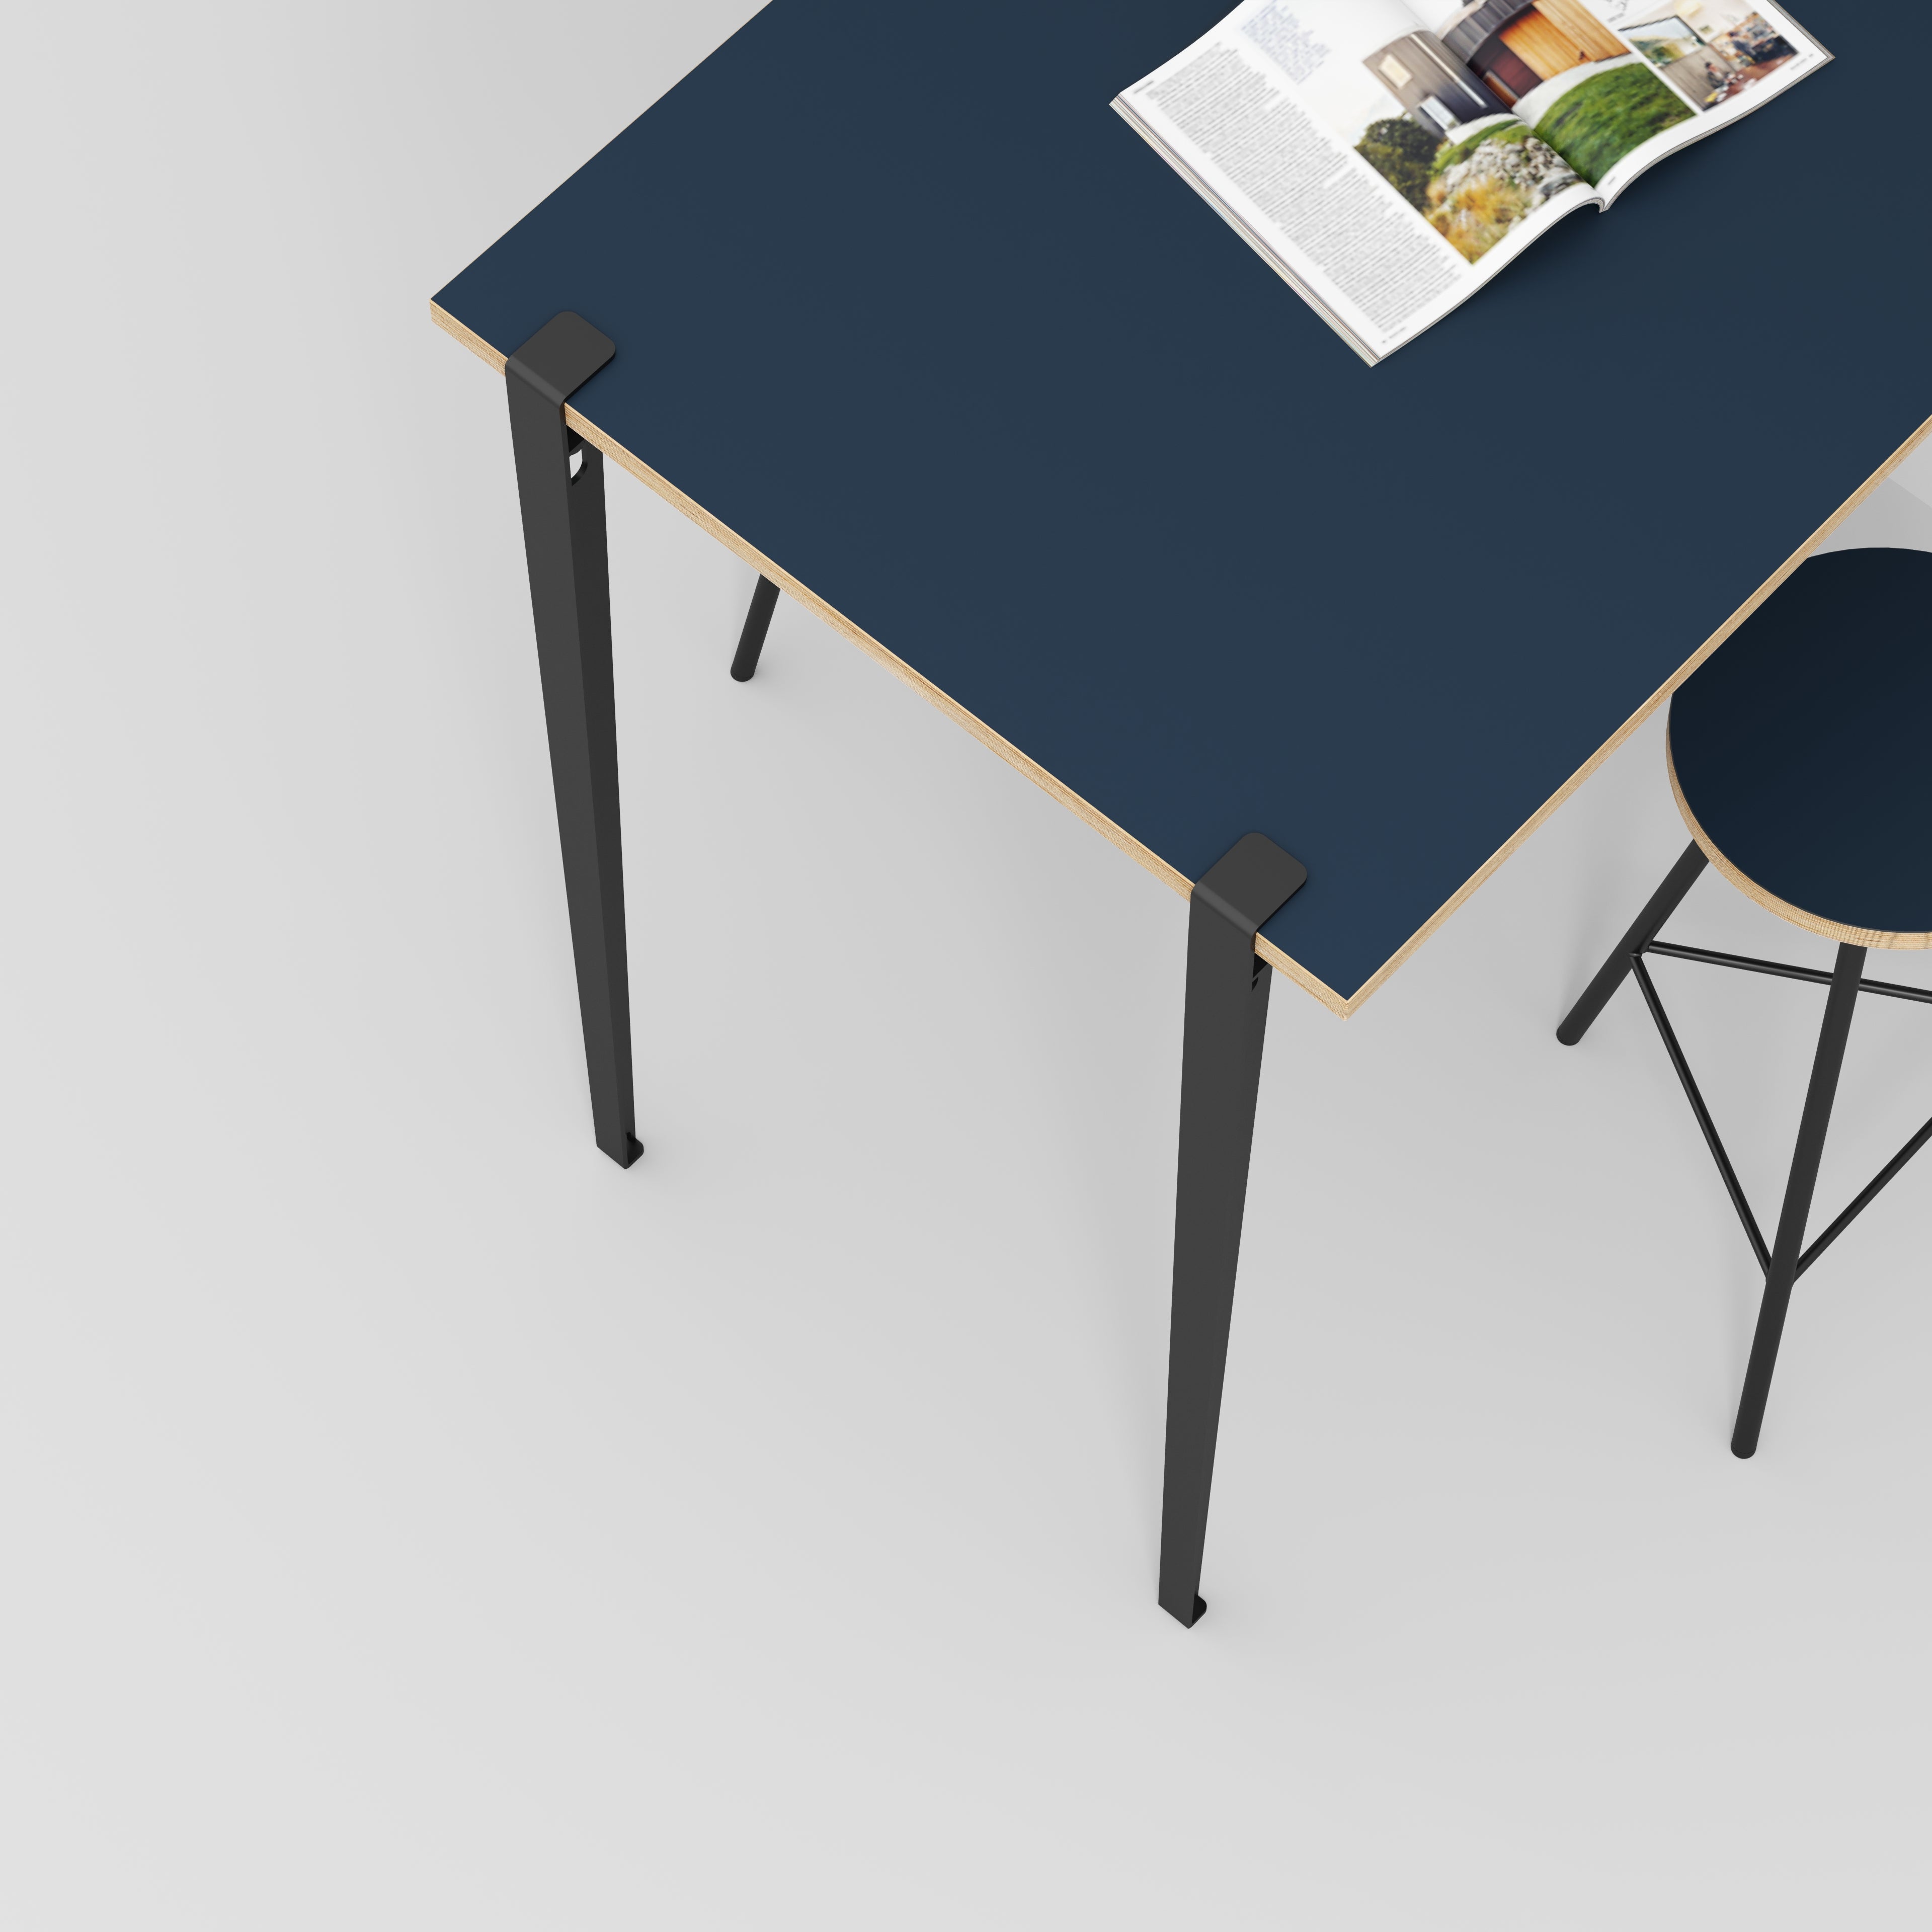 Wall Table with Black Tiptoe Legs and Brackets - Formica Night Sea Blue - 1200(w) x 800(d) x 1100(h)